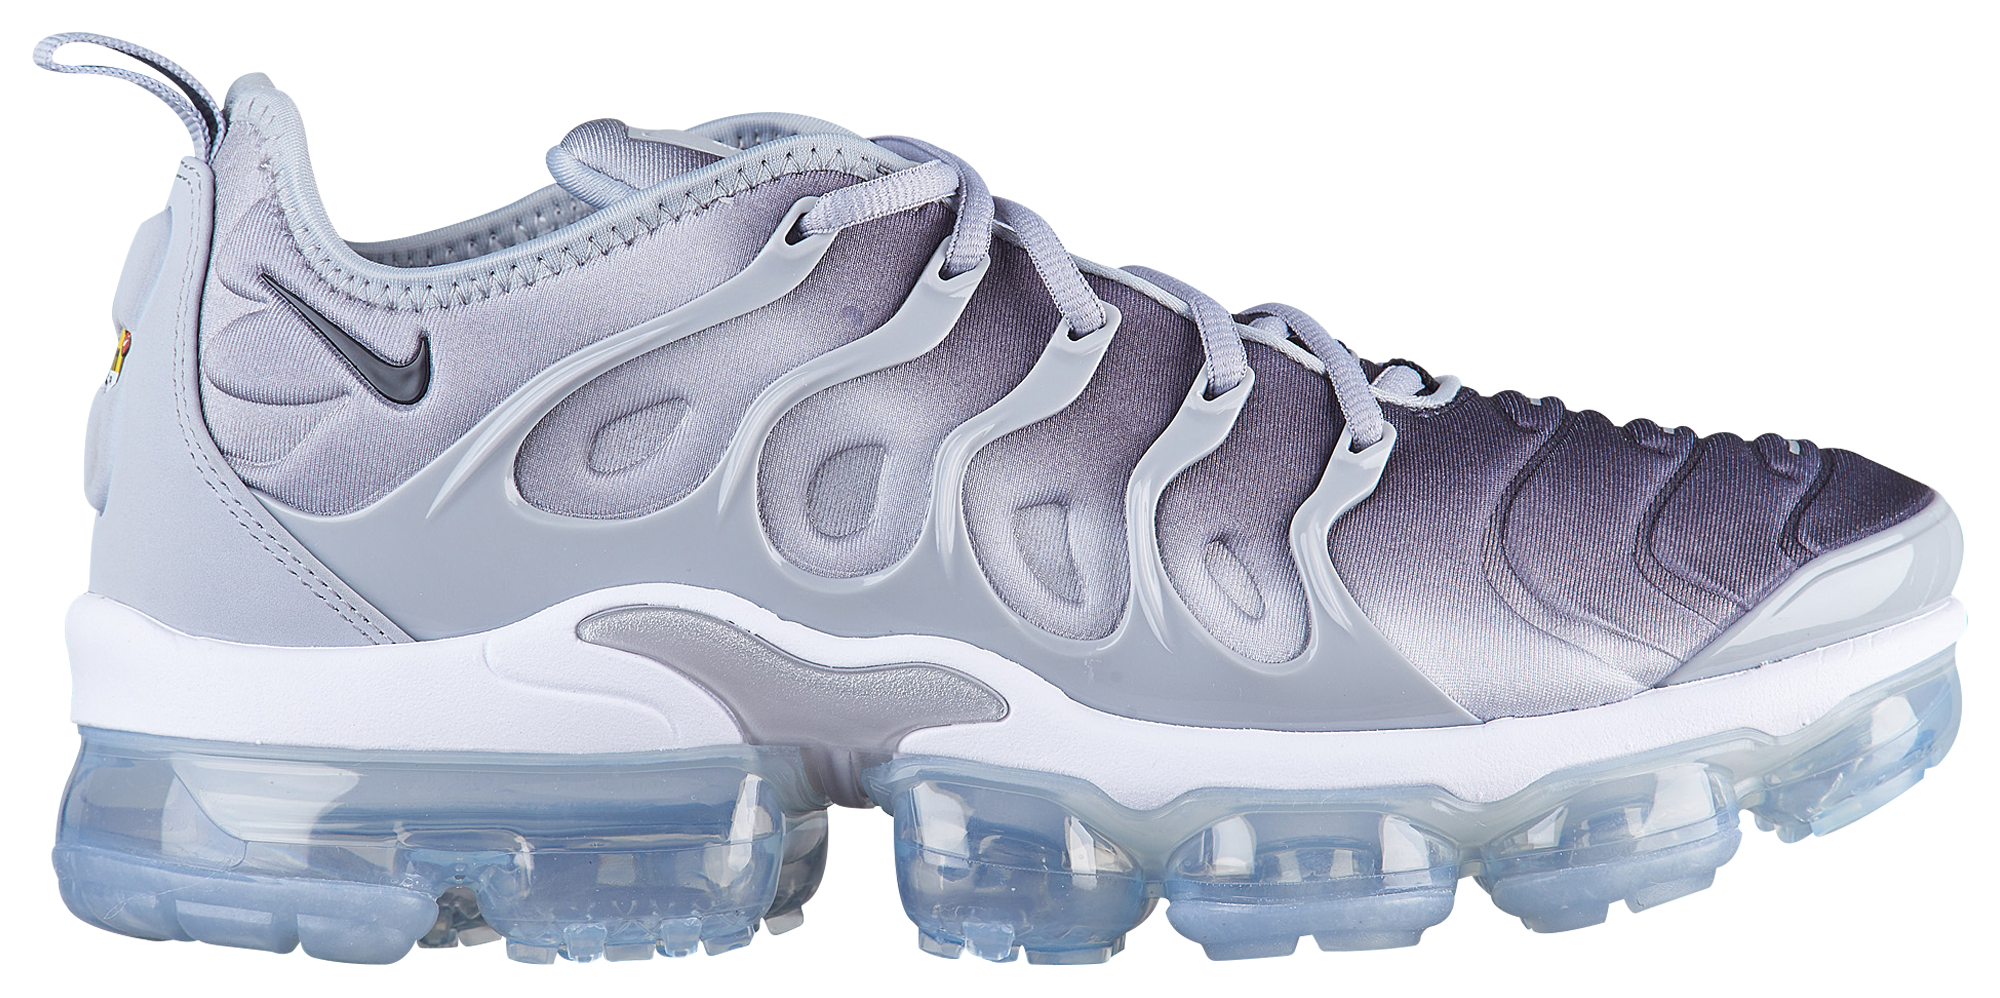 Nike Womens Air Vapormax Plus Shoes Size 6.5w in Green